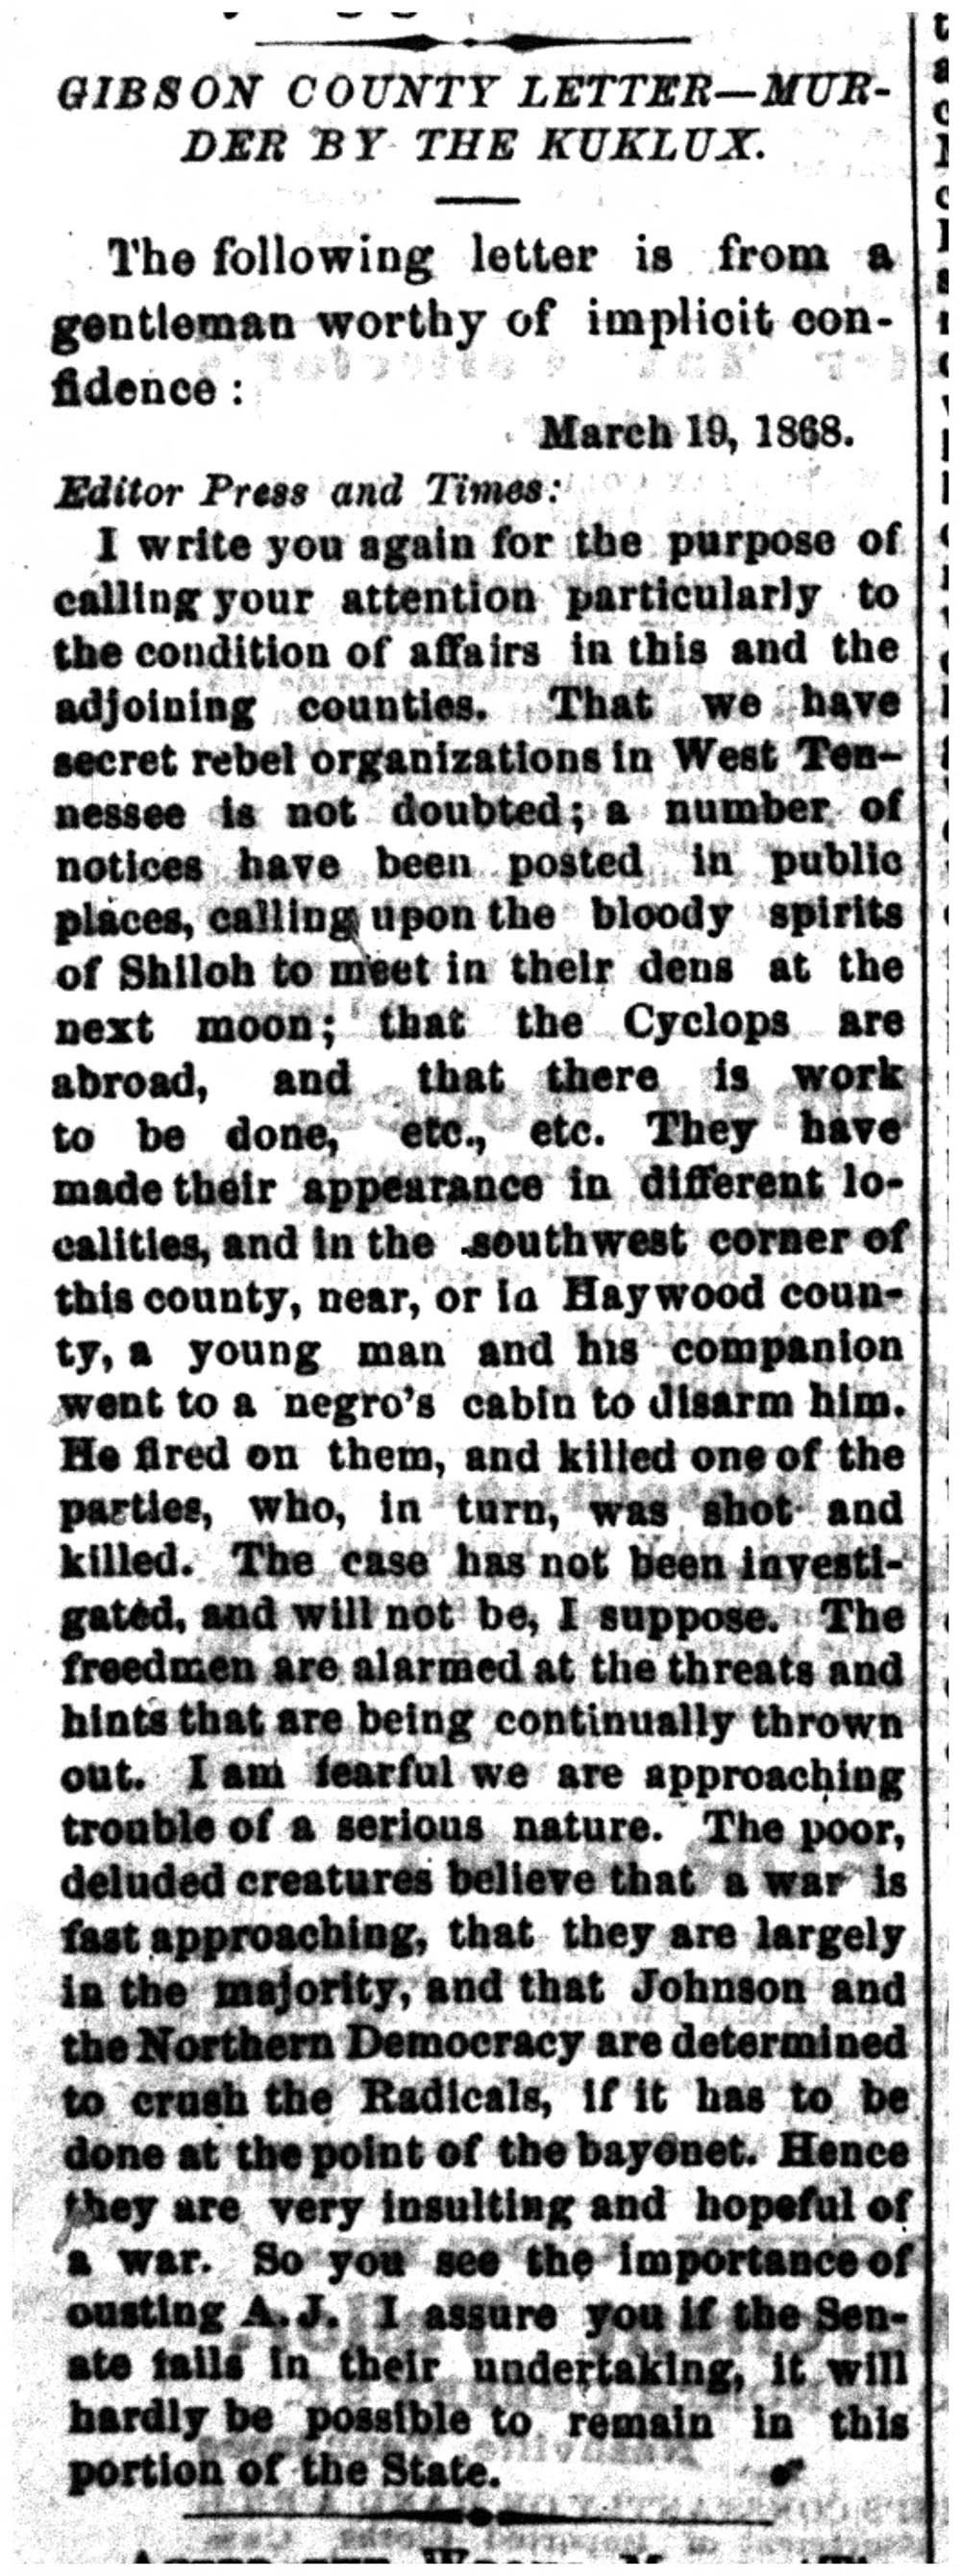 A letter to the editor reporting on a recent murder of an African American man in Gibson County, presumably committed by the Ku Klux Klan